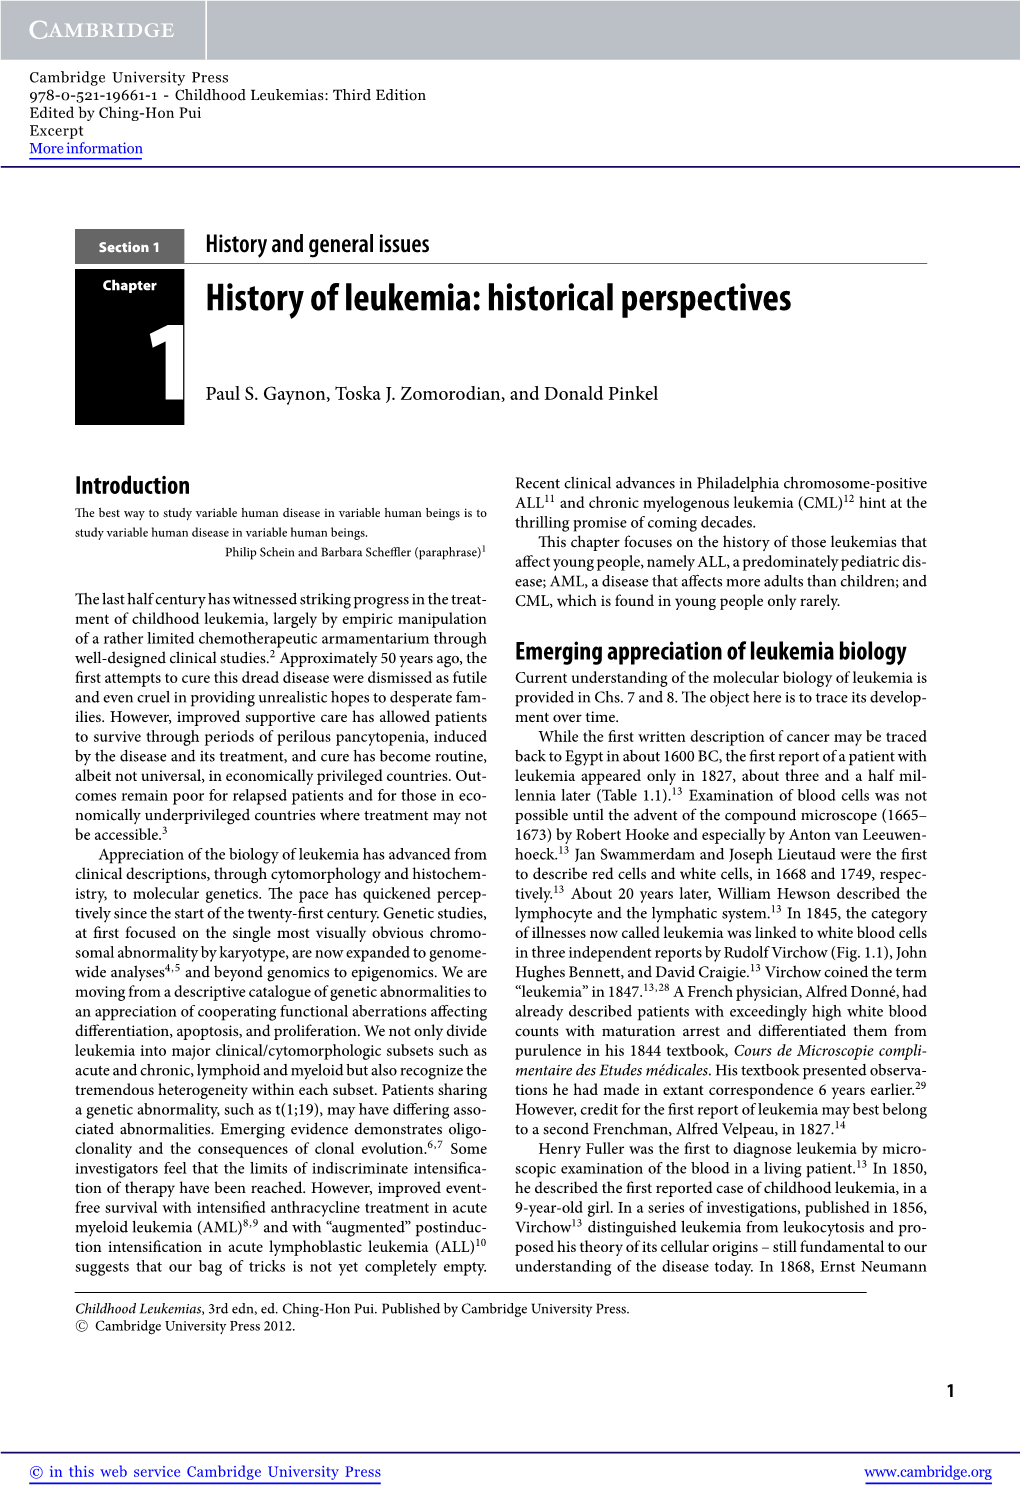 History of Leukemia: Historical Perspectives Paul S